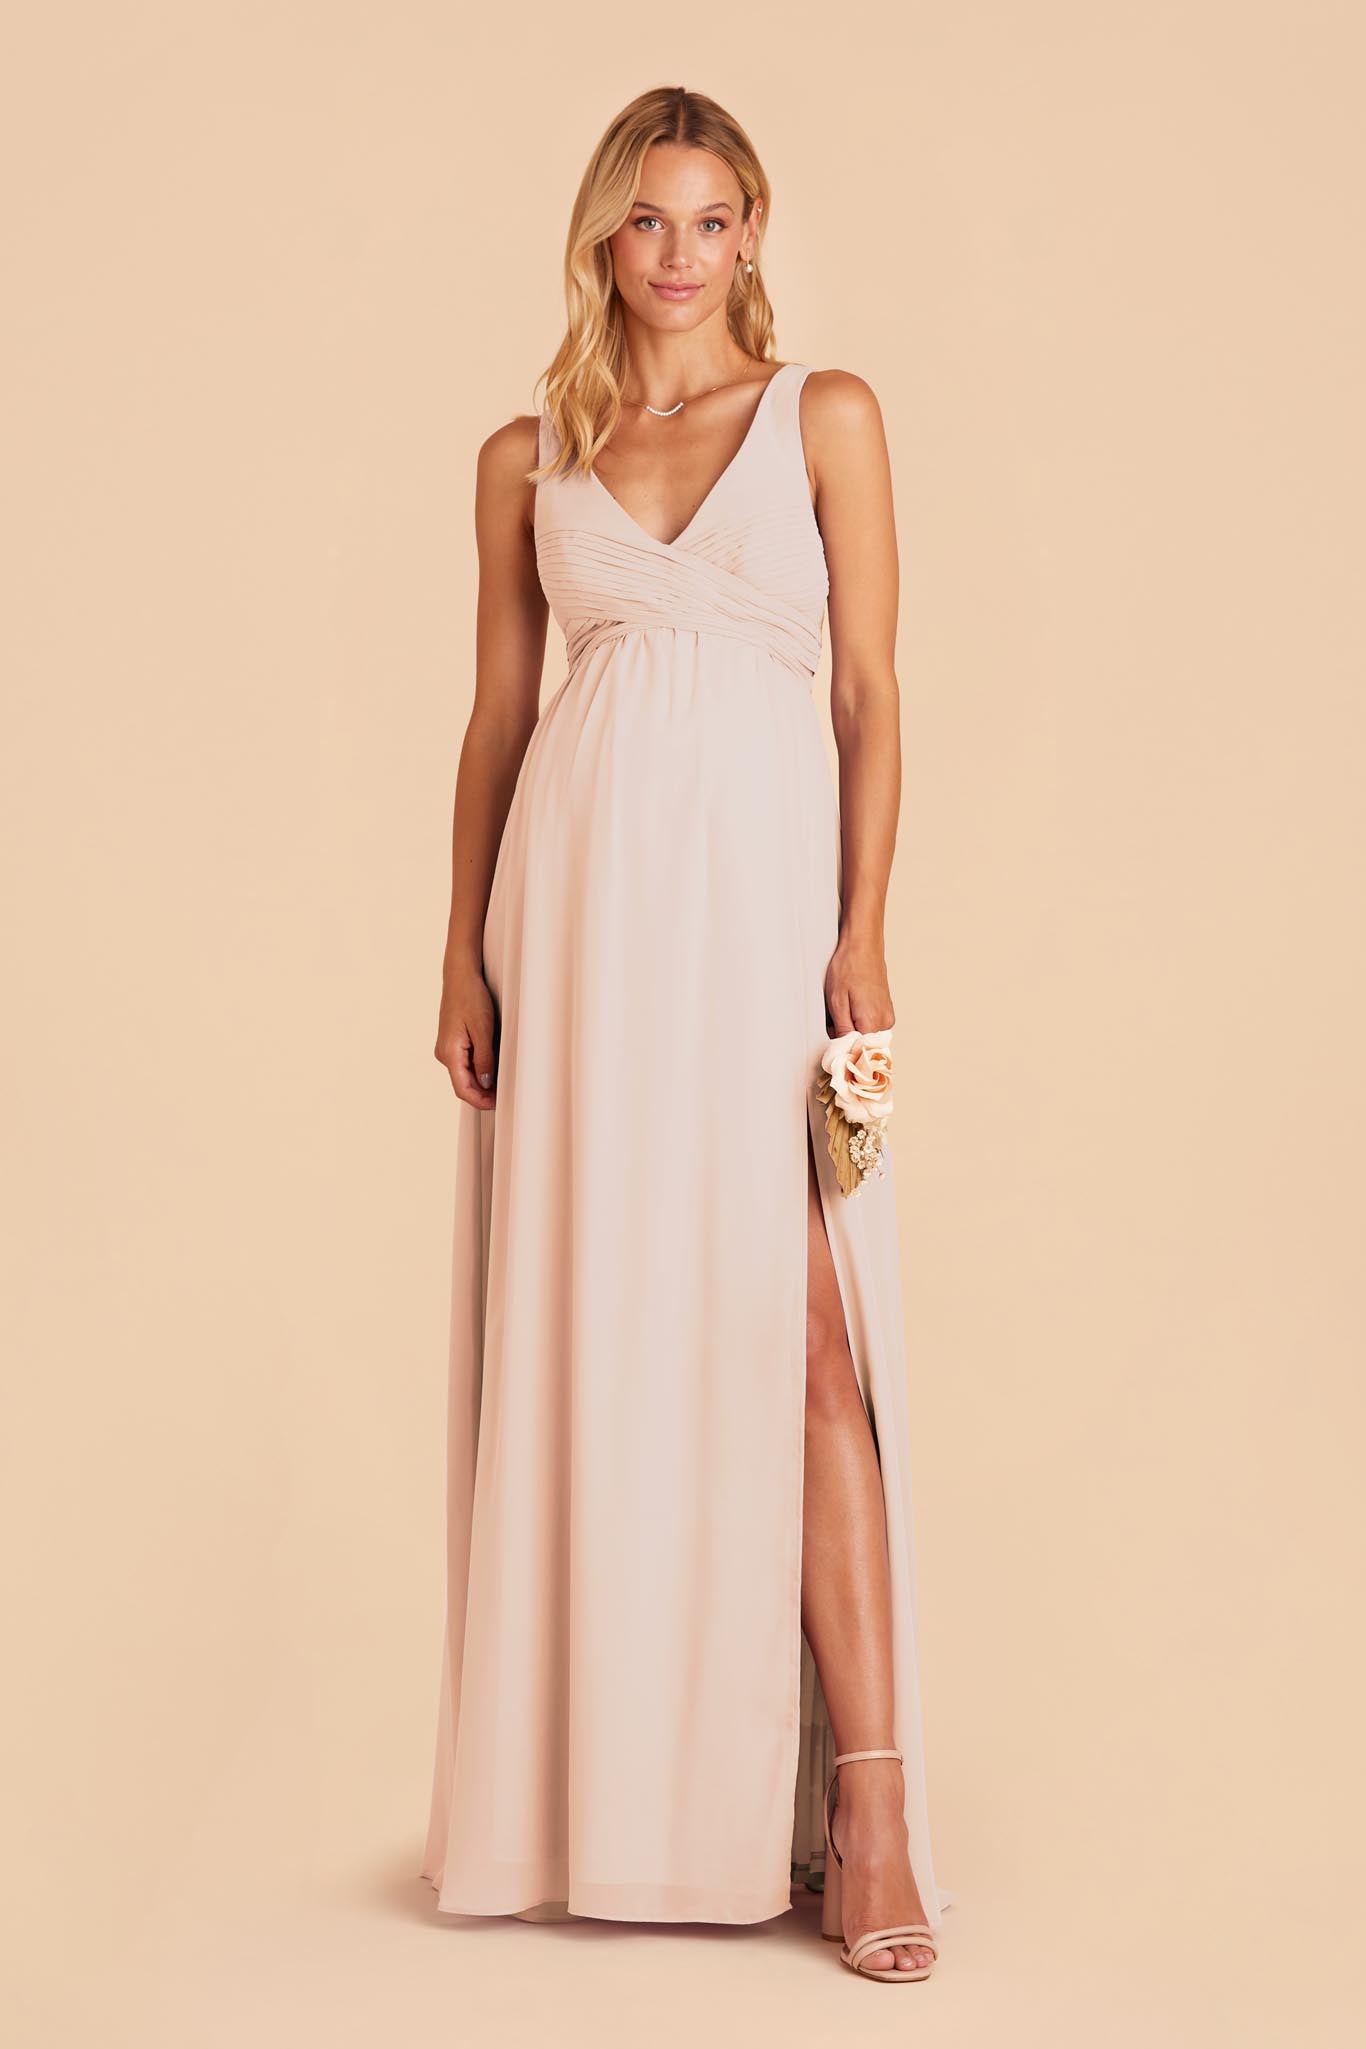 Pale Blush Laurie Empire Dress by Birdy Grey